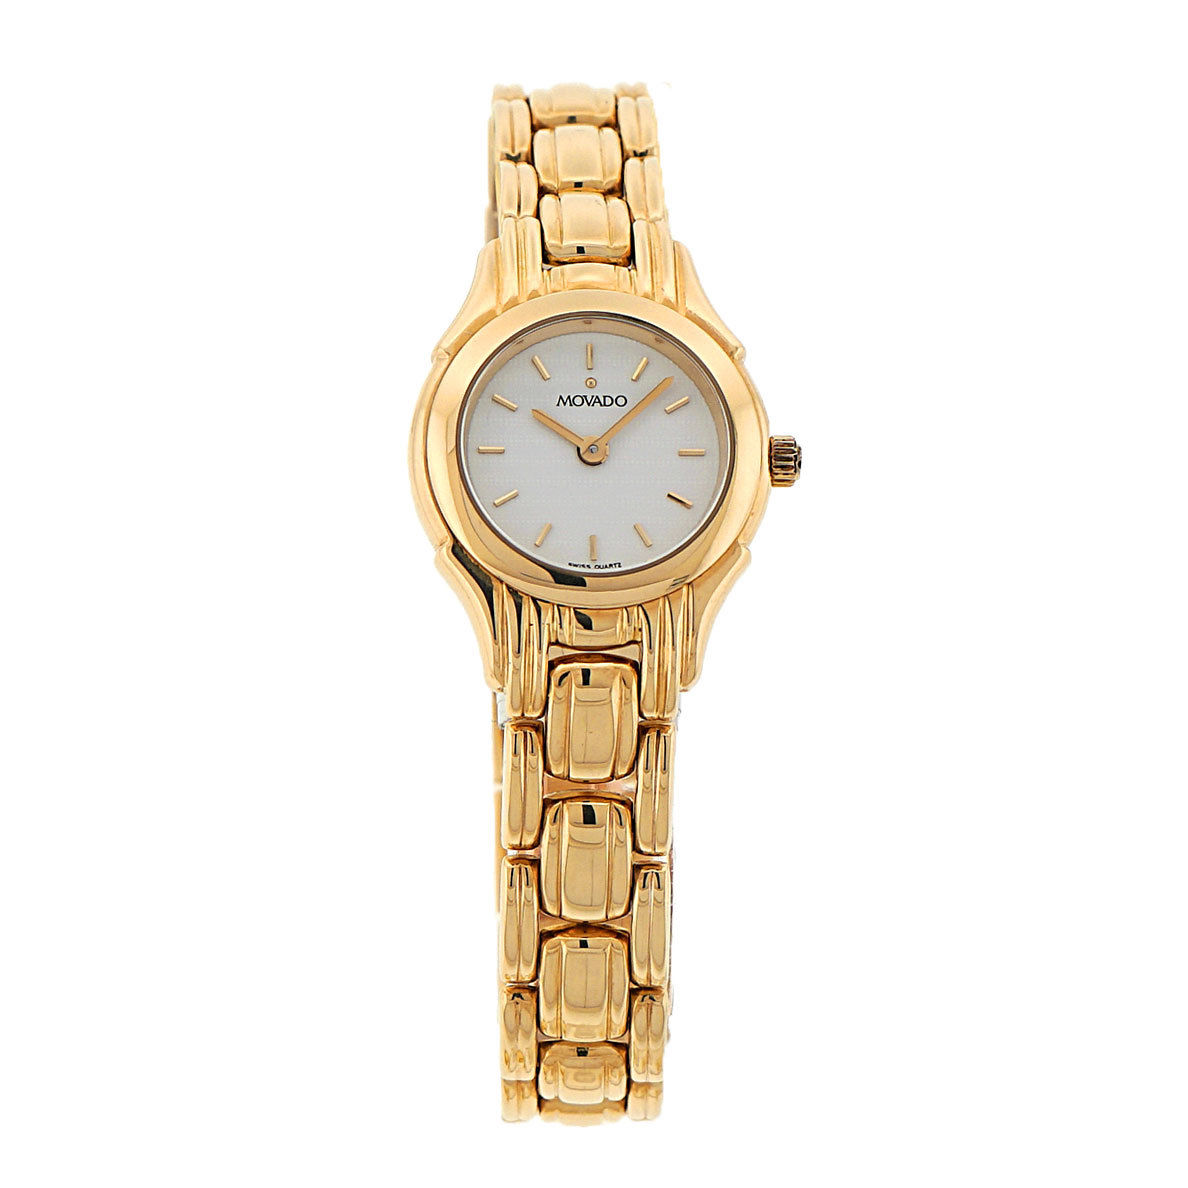 Movado 14K solid gold watch | New York Jewelers Chicago